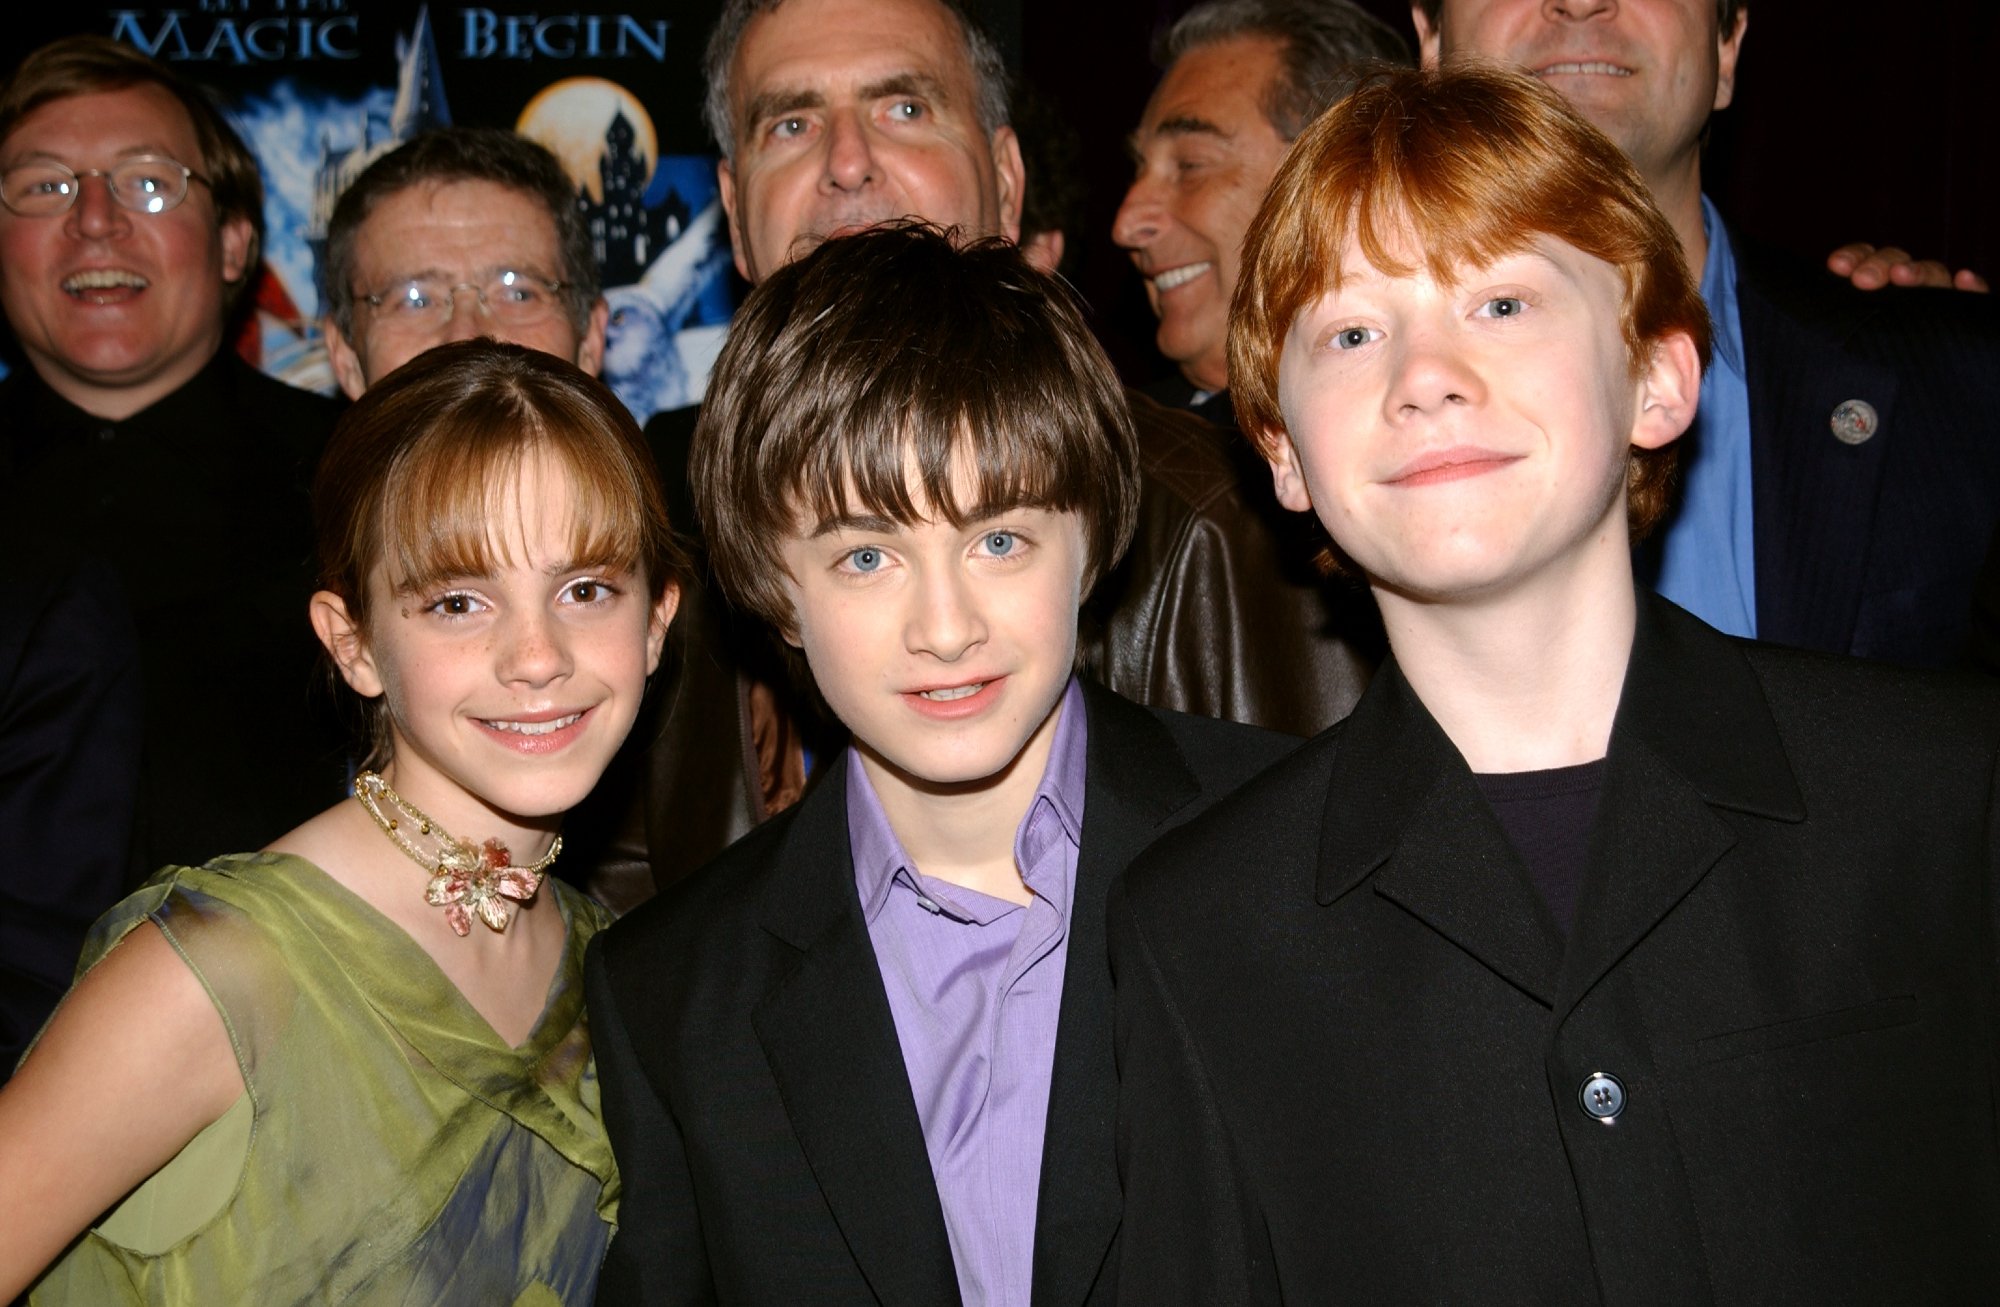 The 'Harry Potter' Movies Had to Change 'Odd' British Laws to Get Made